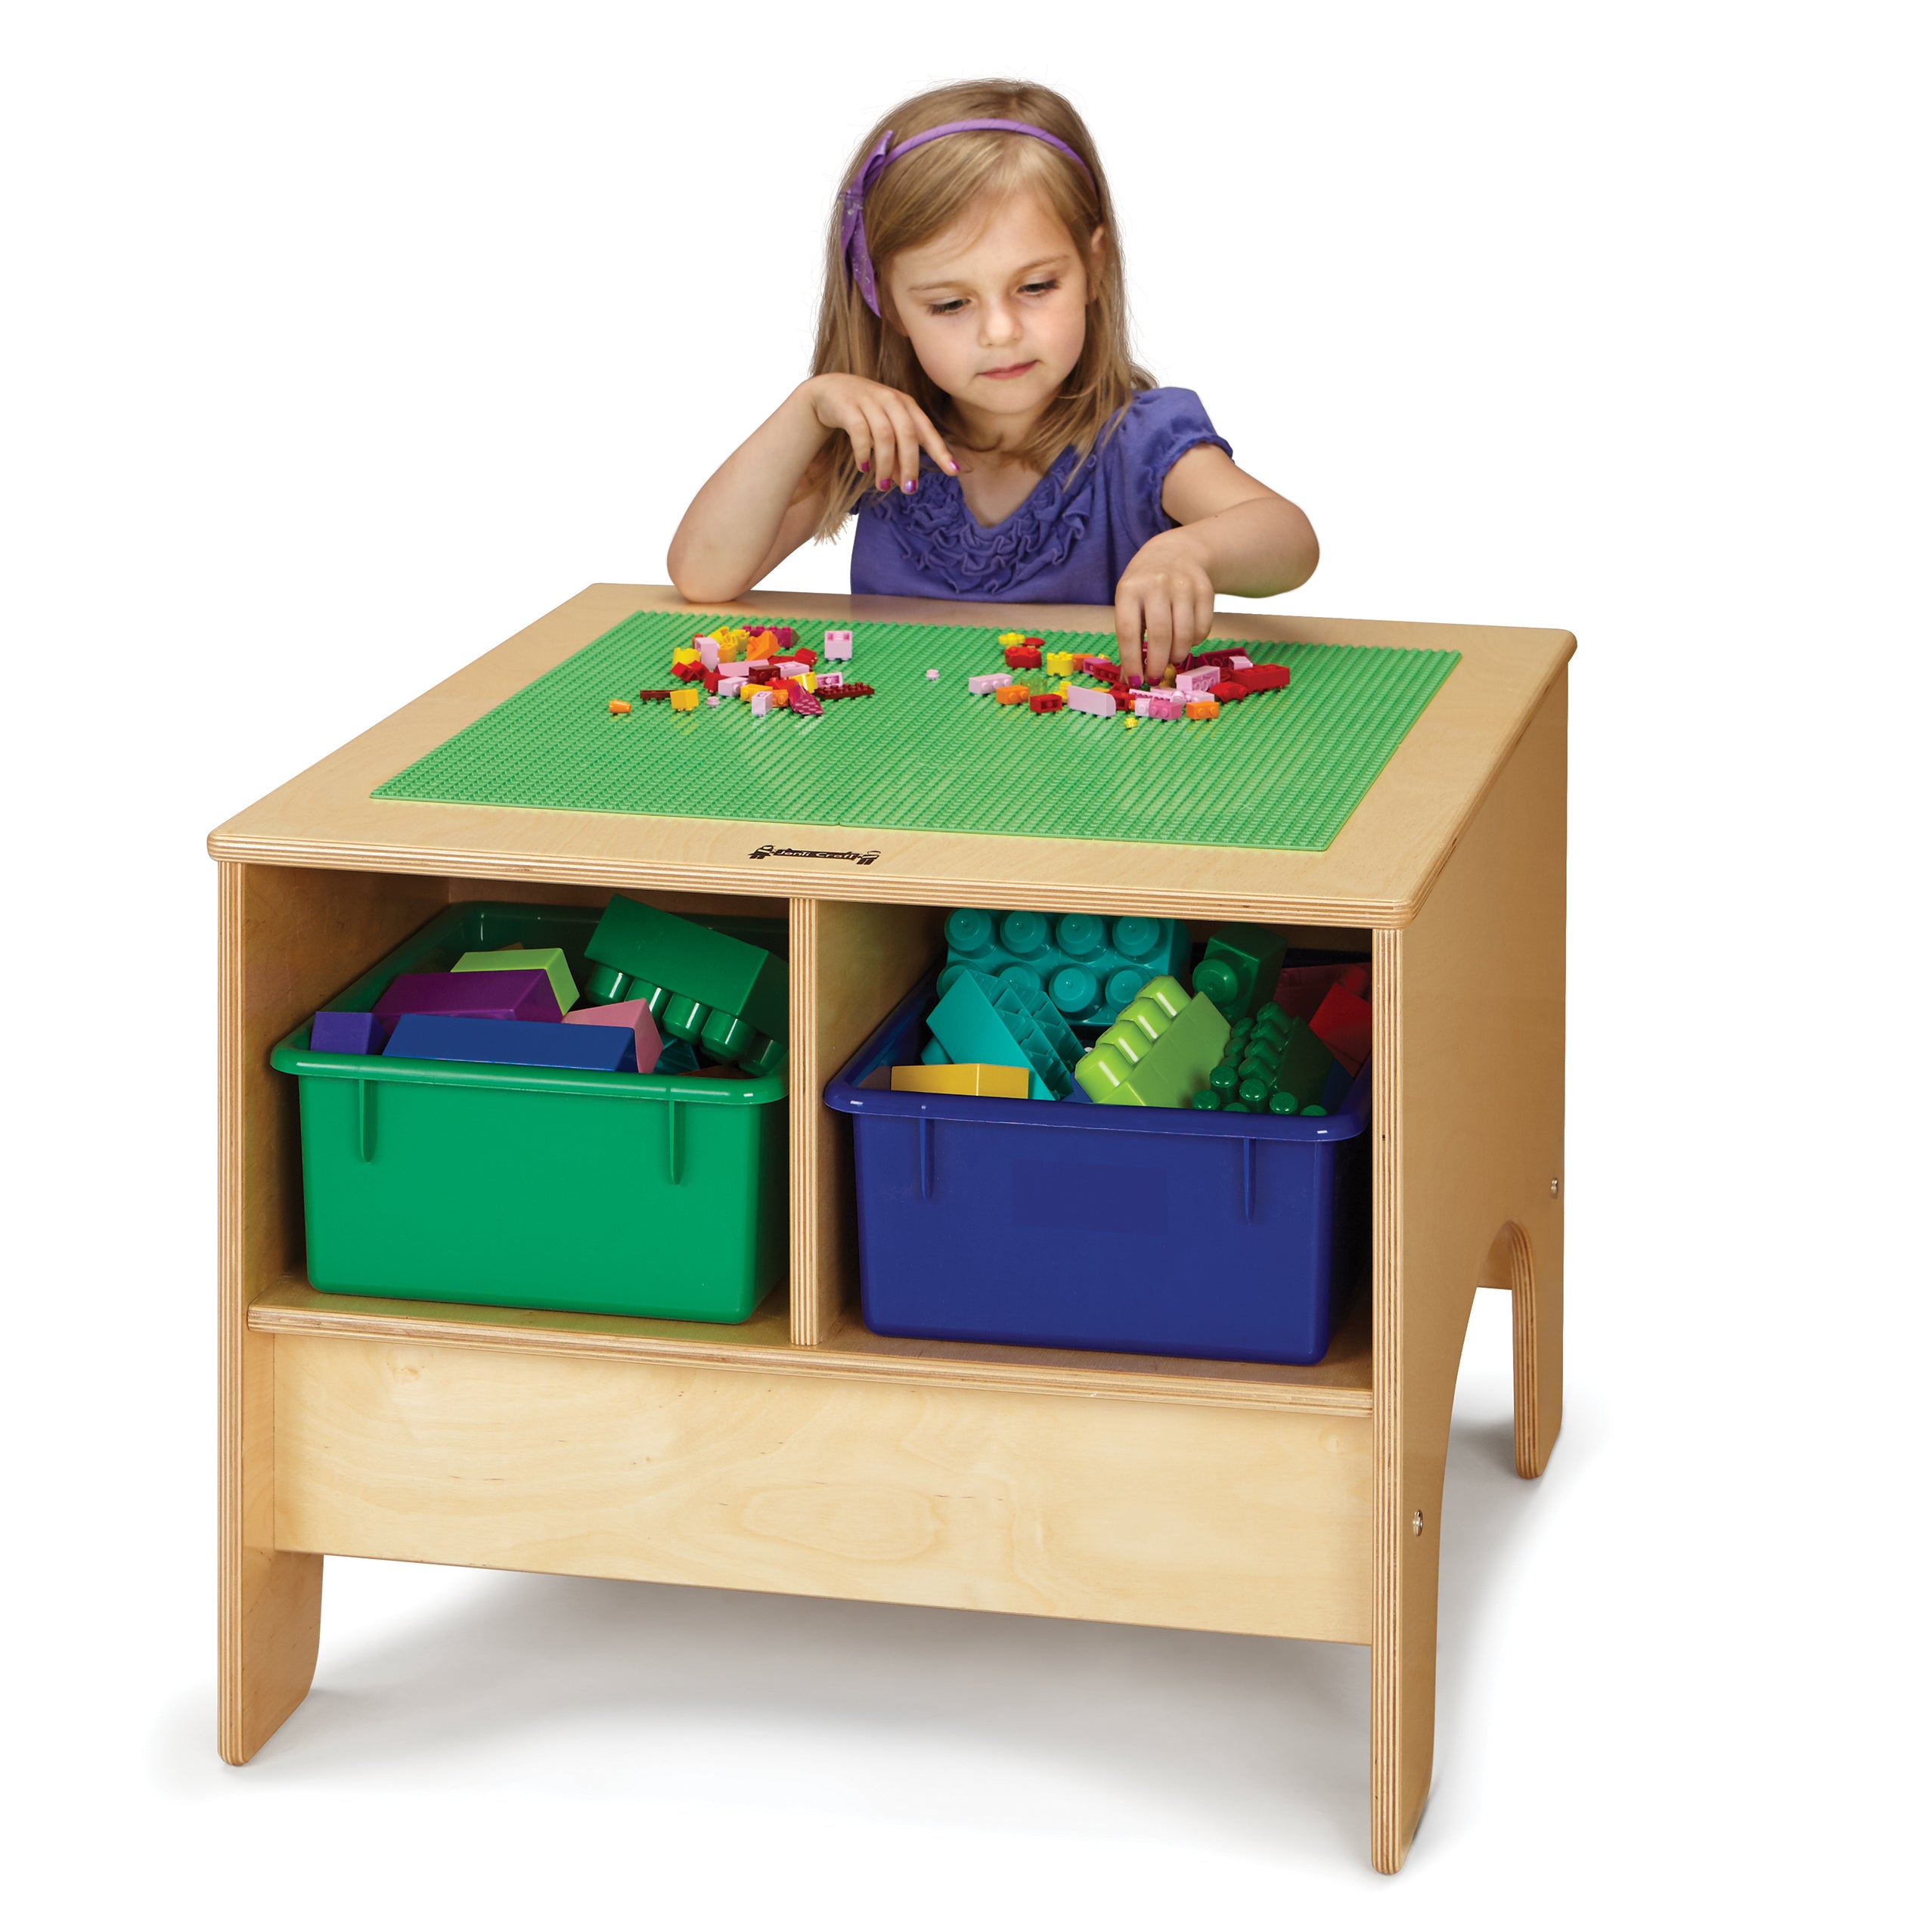 57449JC, Jonti-Craft KYDZ Building Table - Traditional Brick Compatible - with Colored Tubs